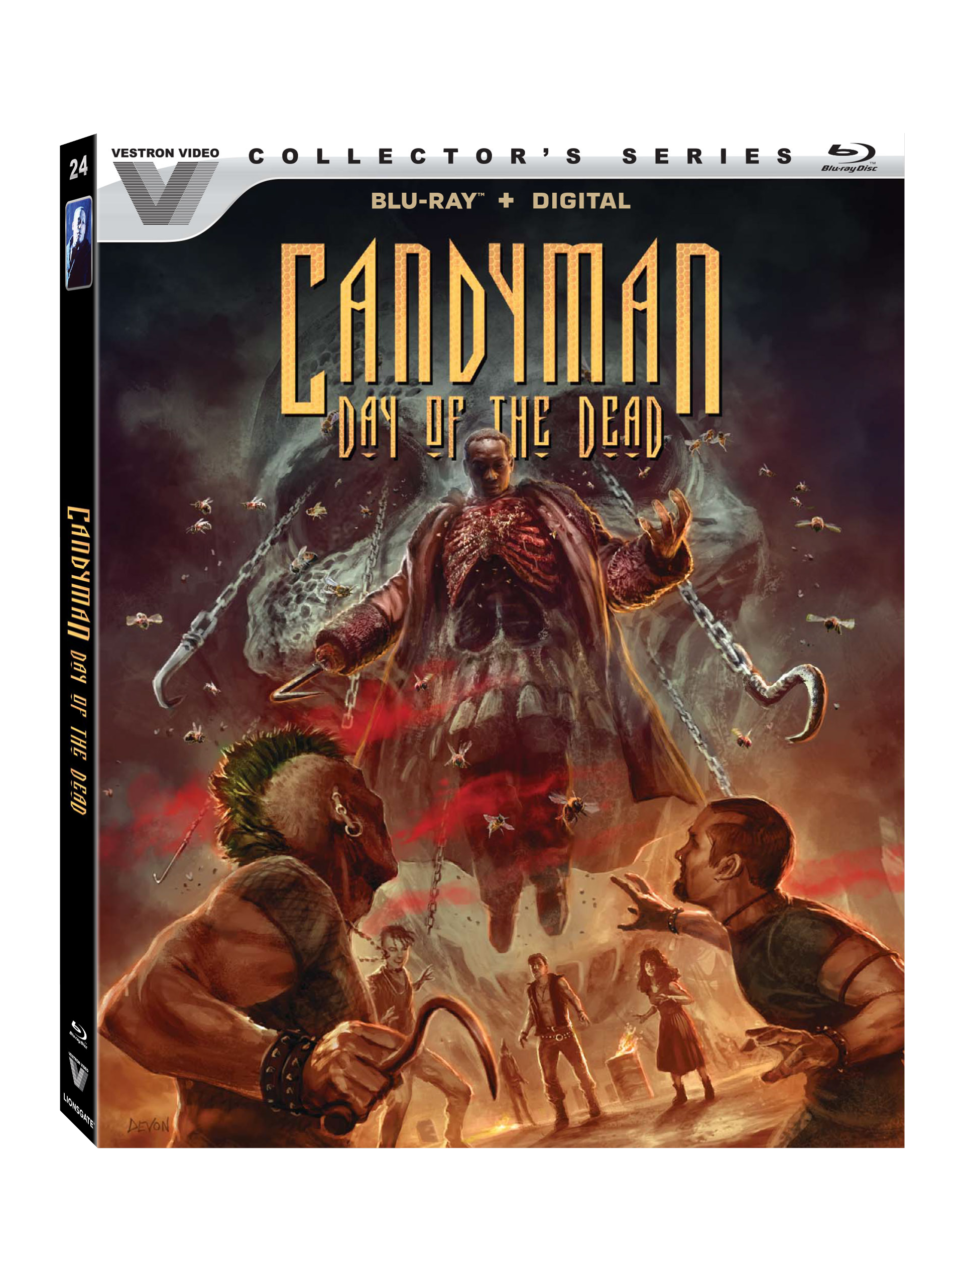 Candyman: Day Of The Dead Blu-Ray Combo Pack cover (Lionsgate)